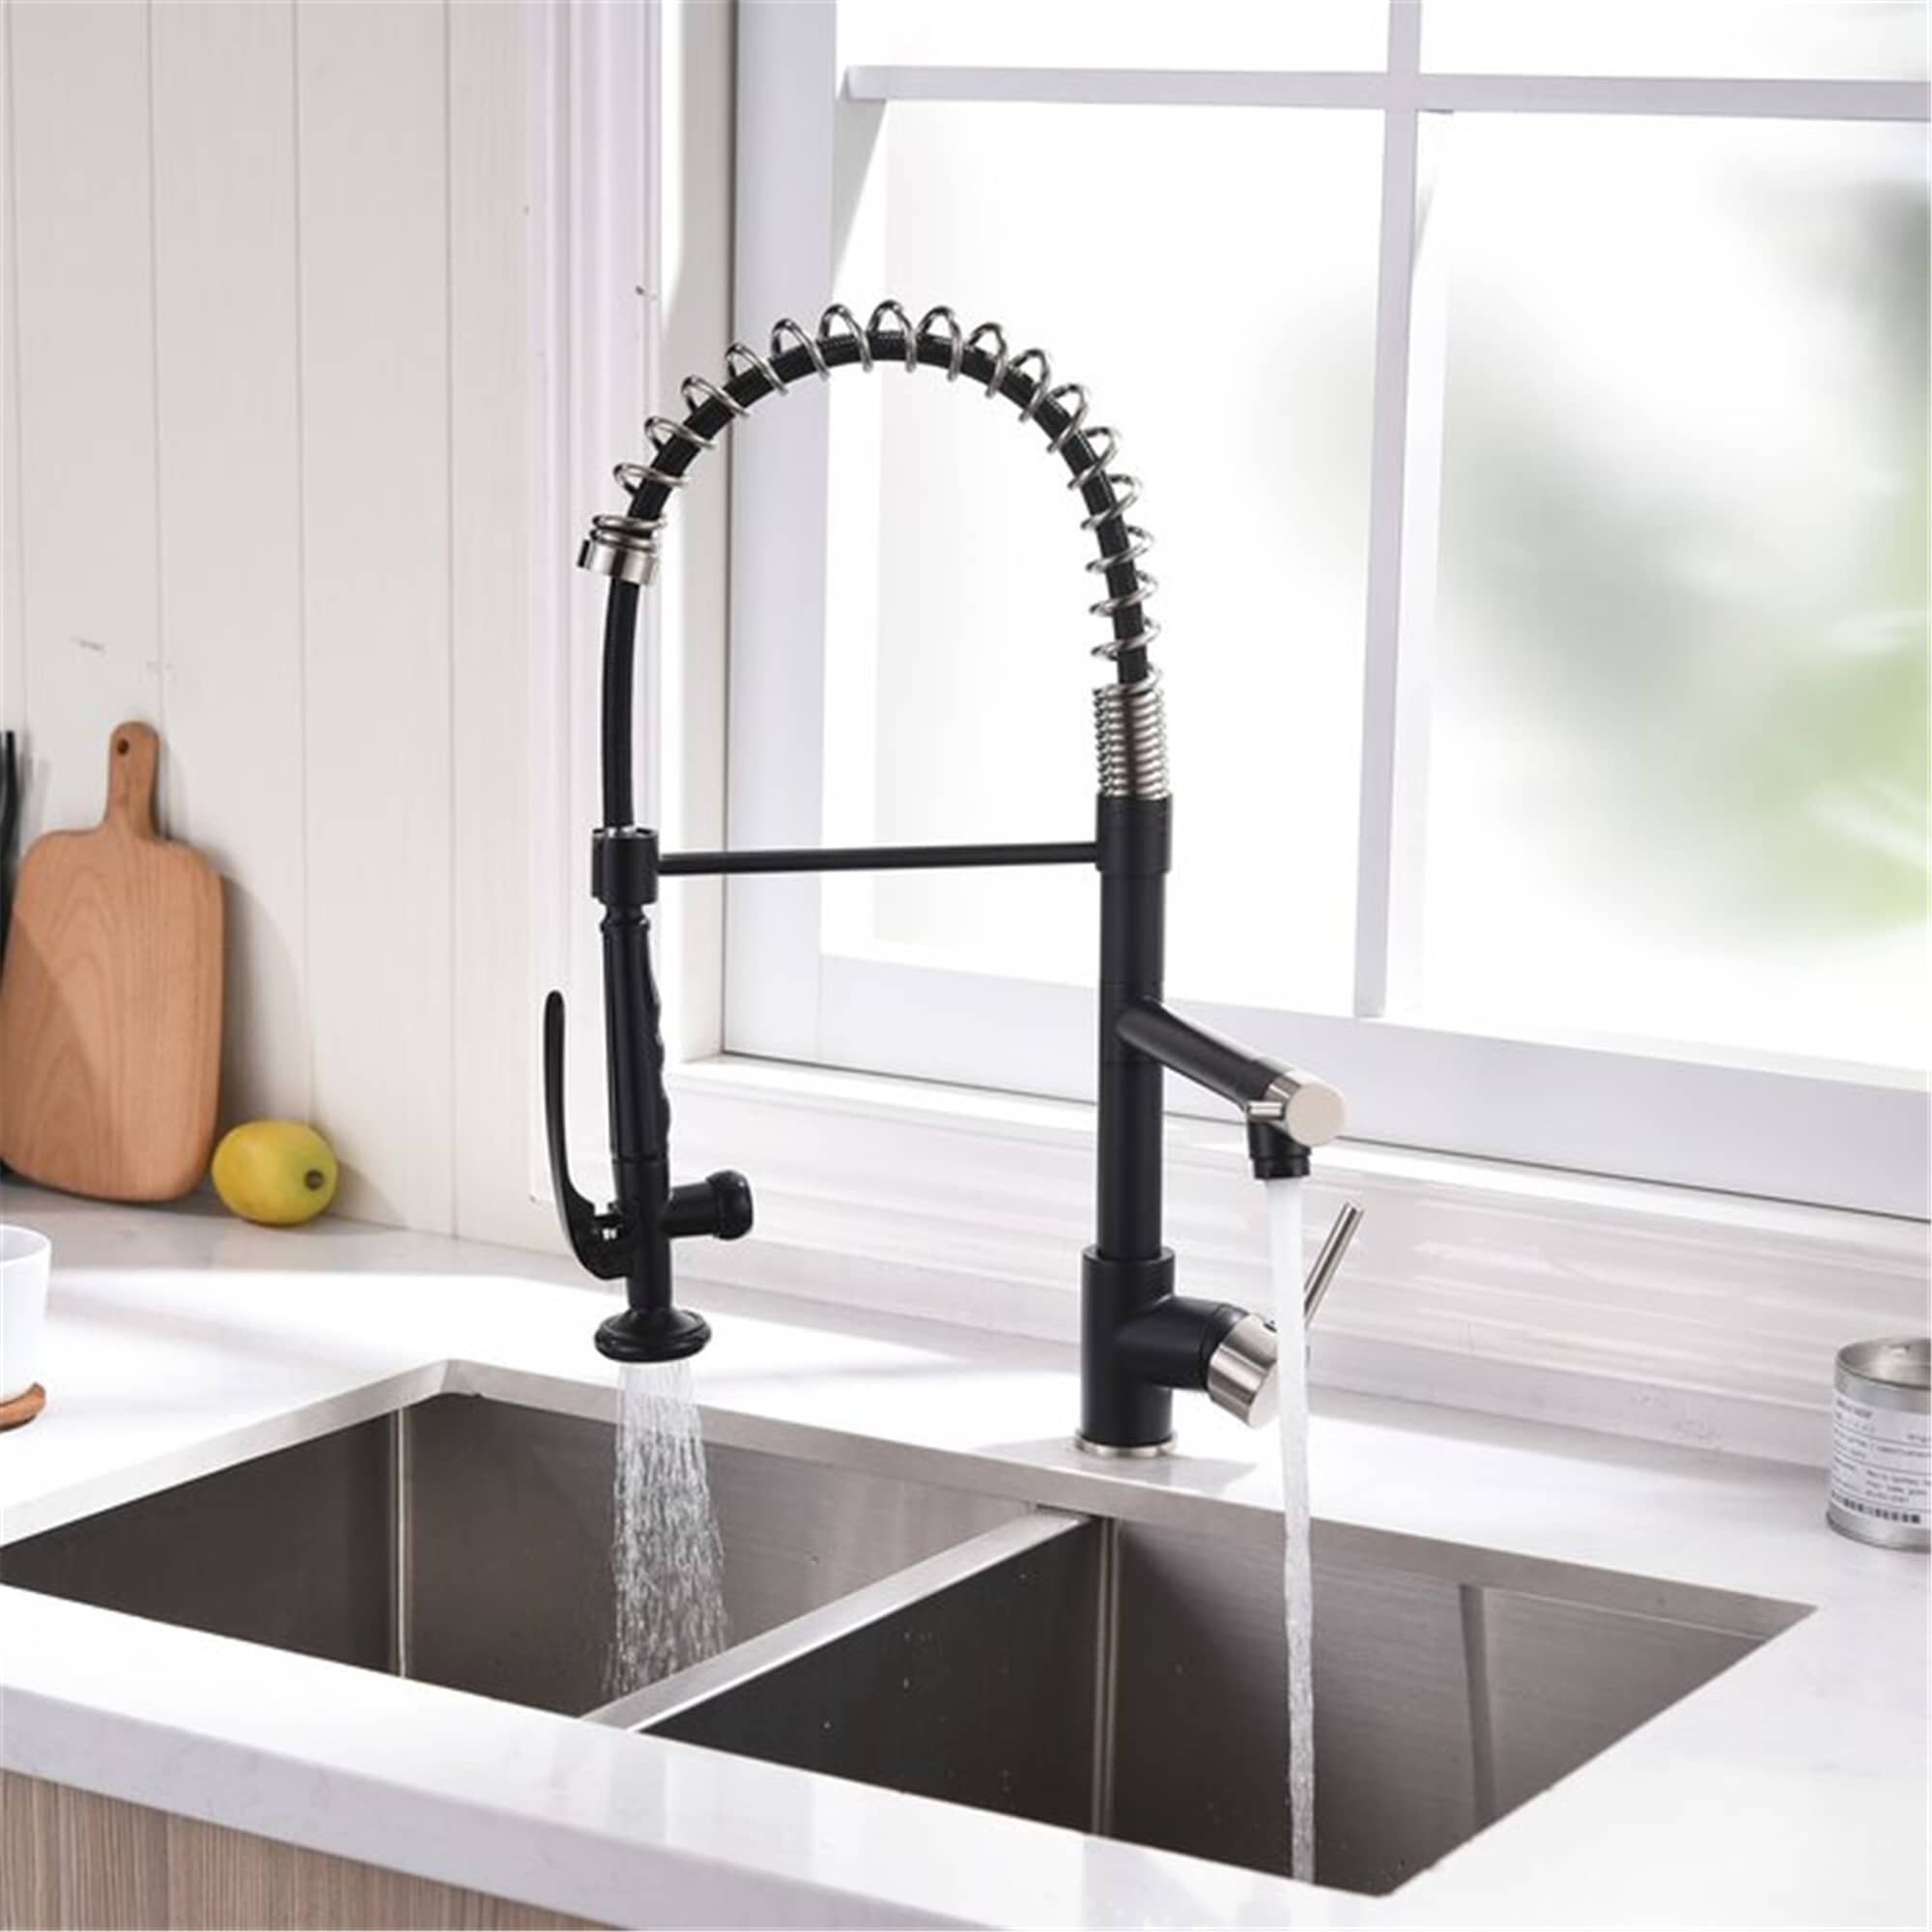 Commercial Spring Single Lever Handle Kitchen Sink Faucet with Pull down sprayer 